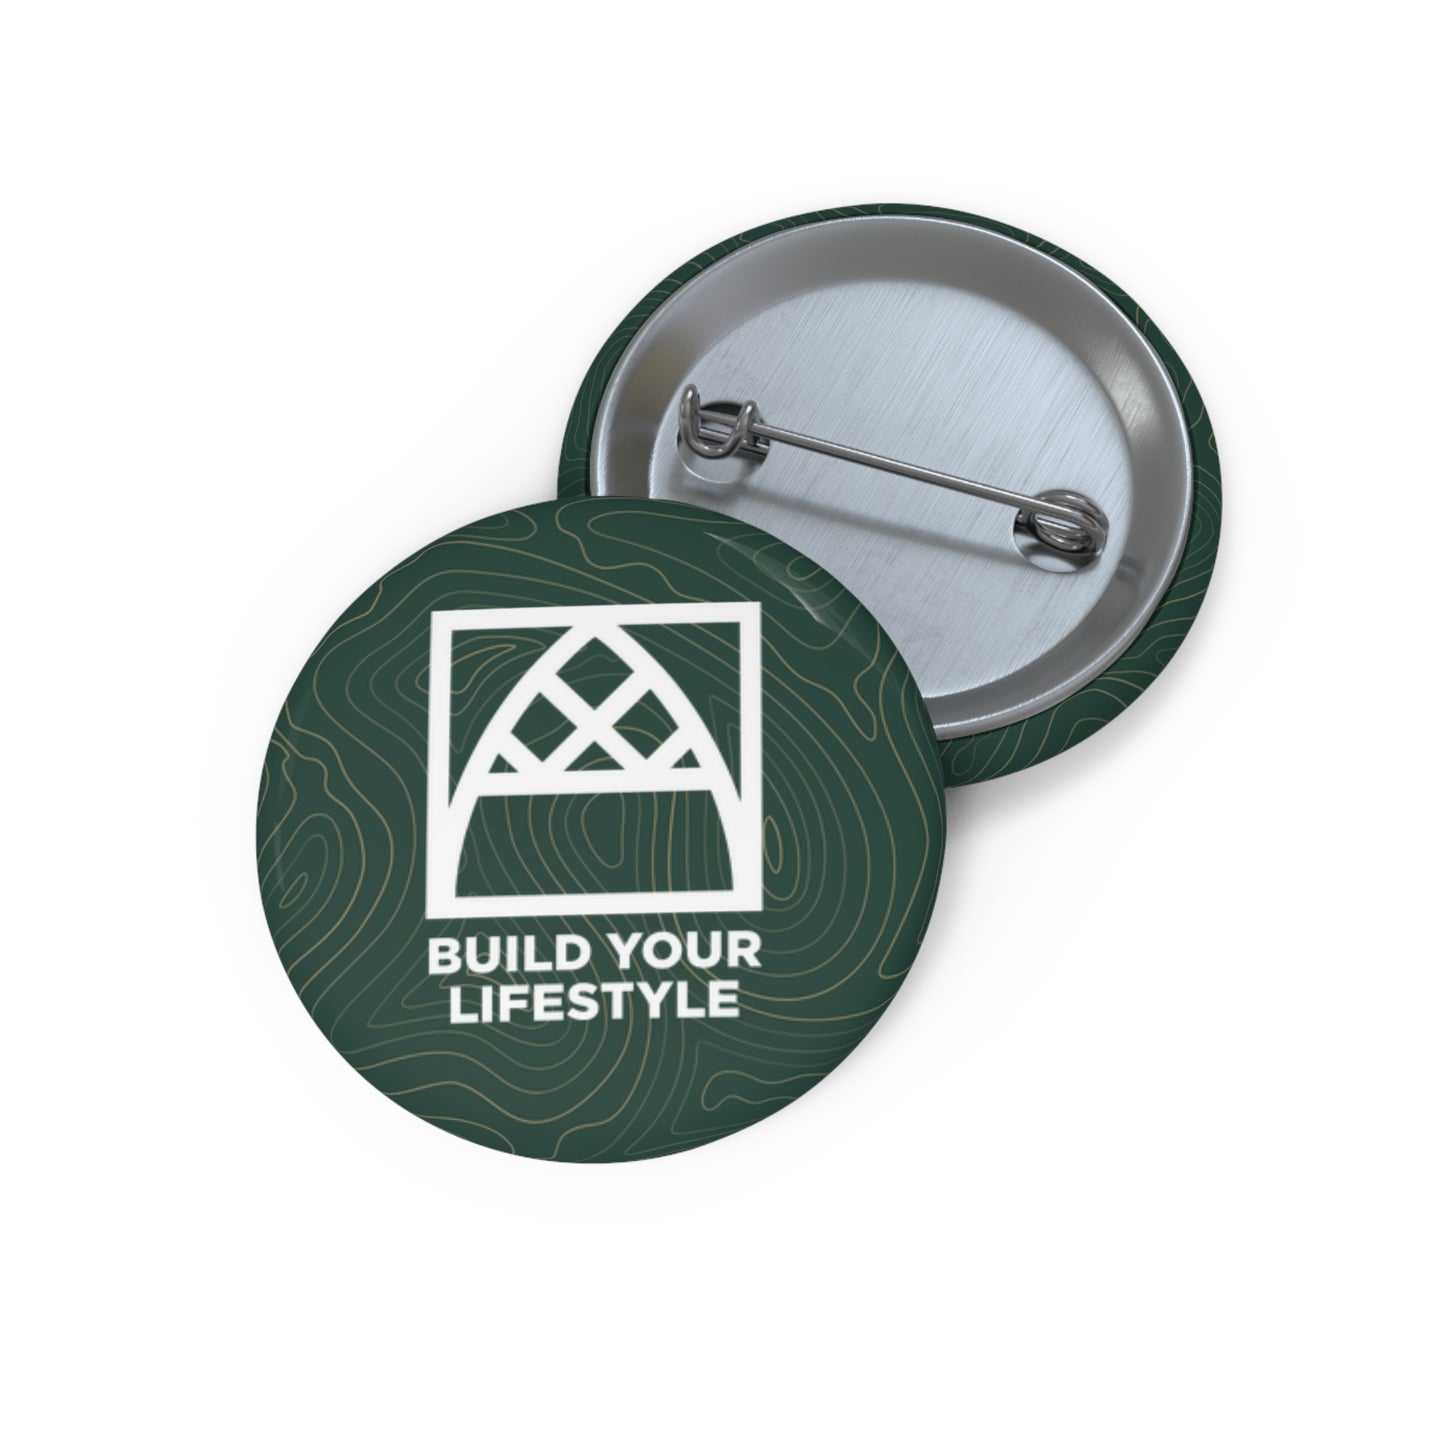 Arched Cabins LLC "Build Your Lifestyle" Buttons Pins